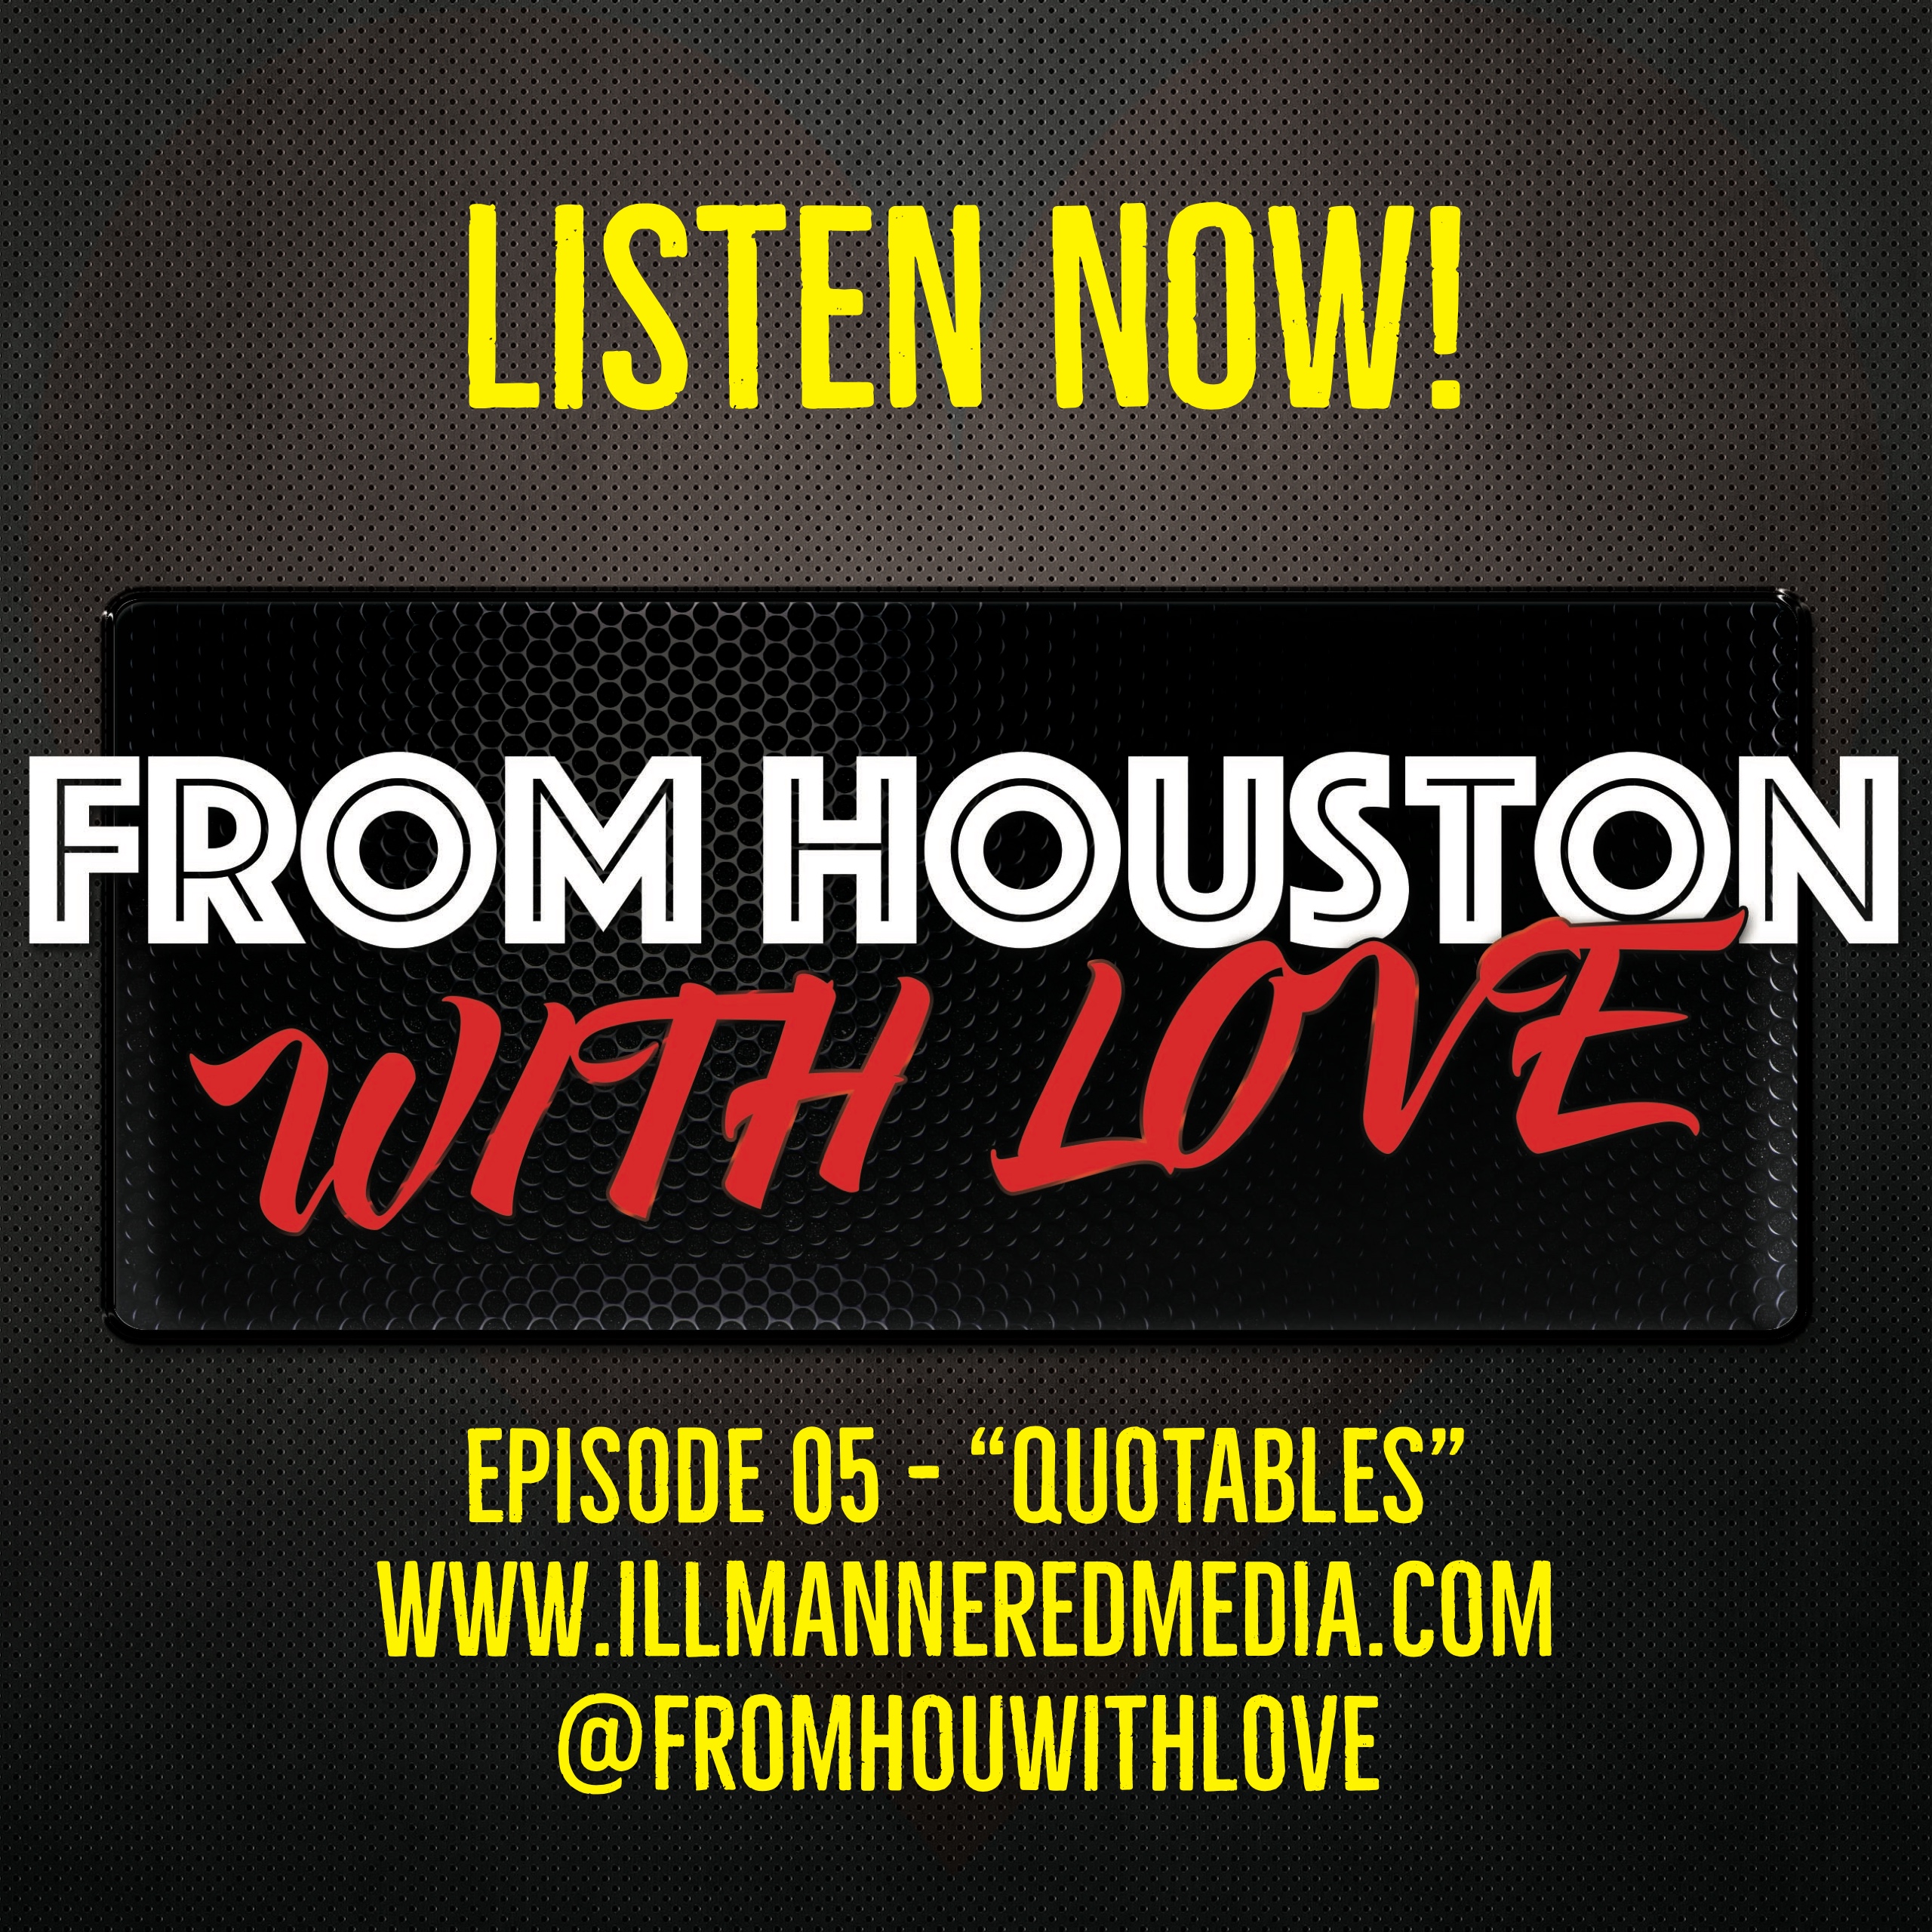 From Houston With Love (Podcast): Episode 05 – “Quotables”